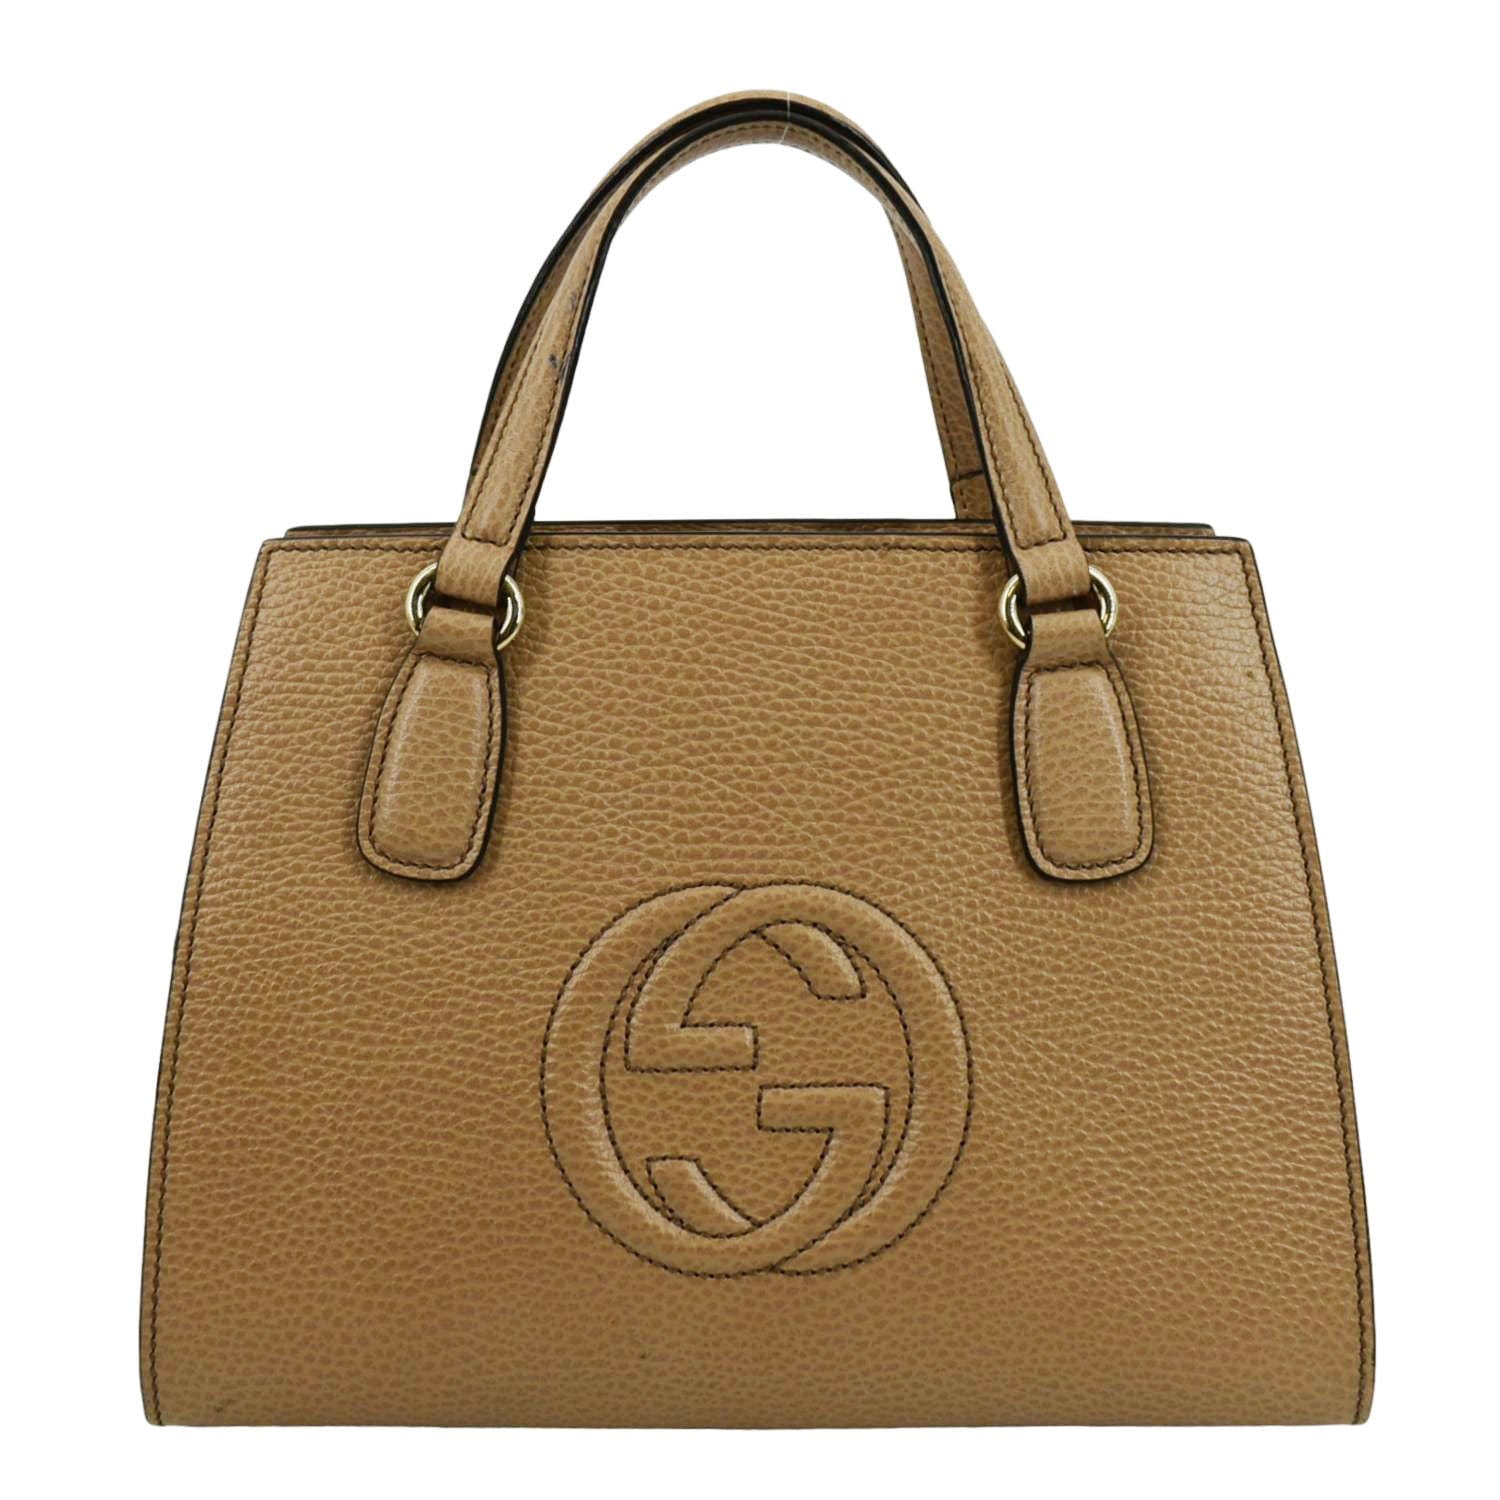 Gucci Soho Beige Leather Small Women's Tote Bag 607722